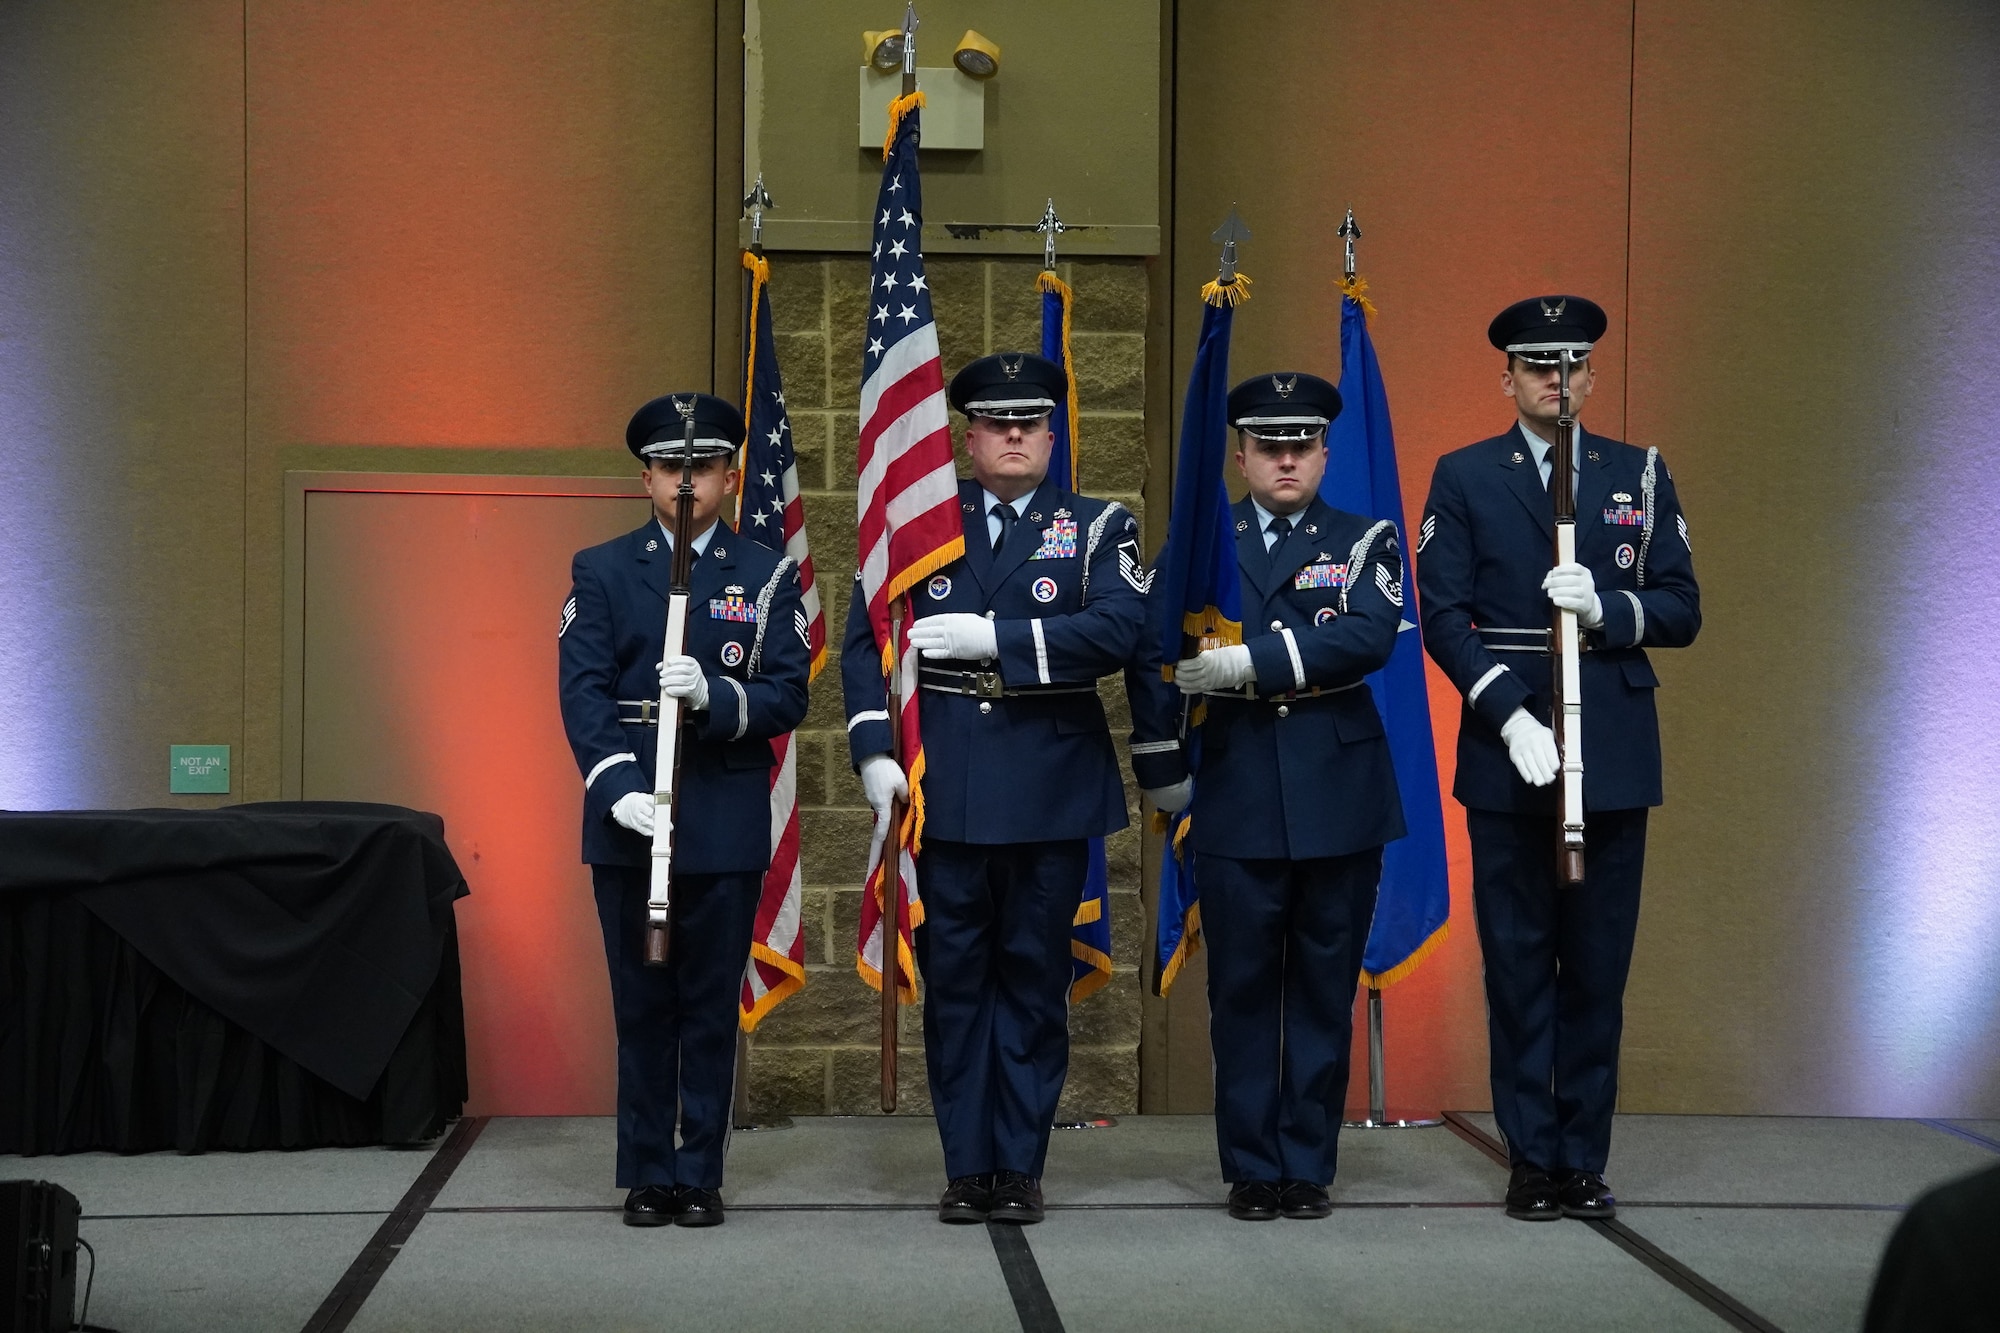 The Honor Guard performed at the 2022 Annual Award ceremony.